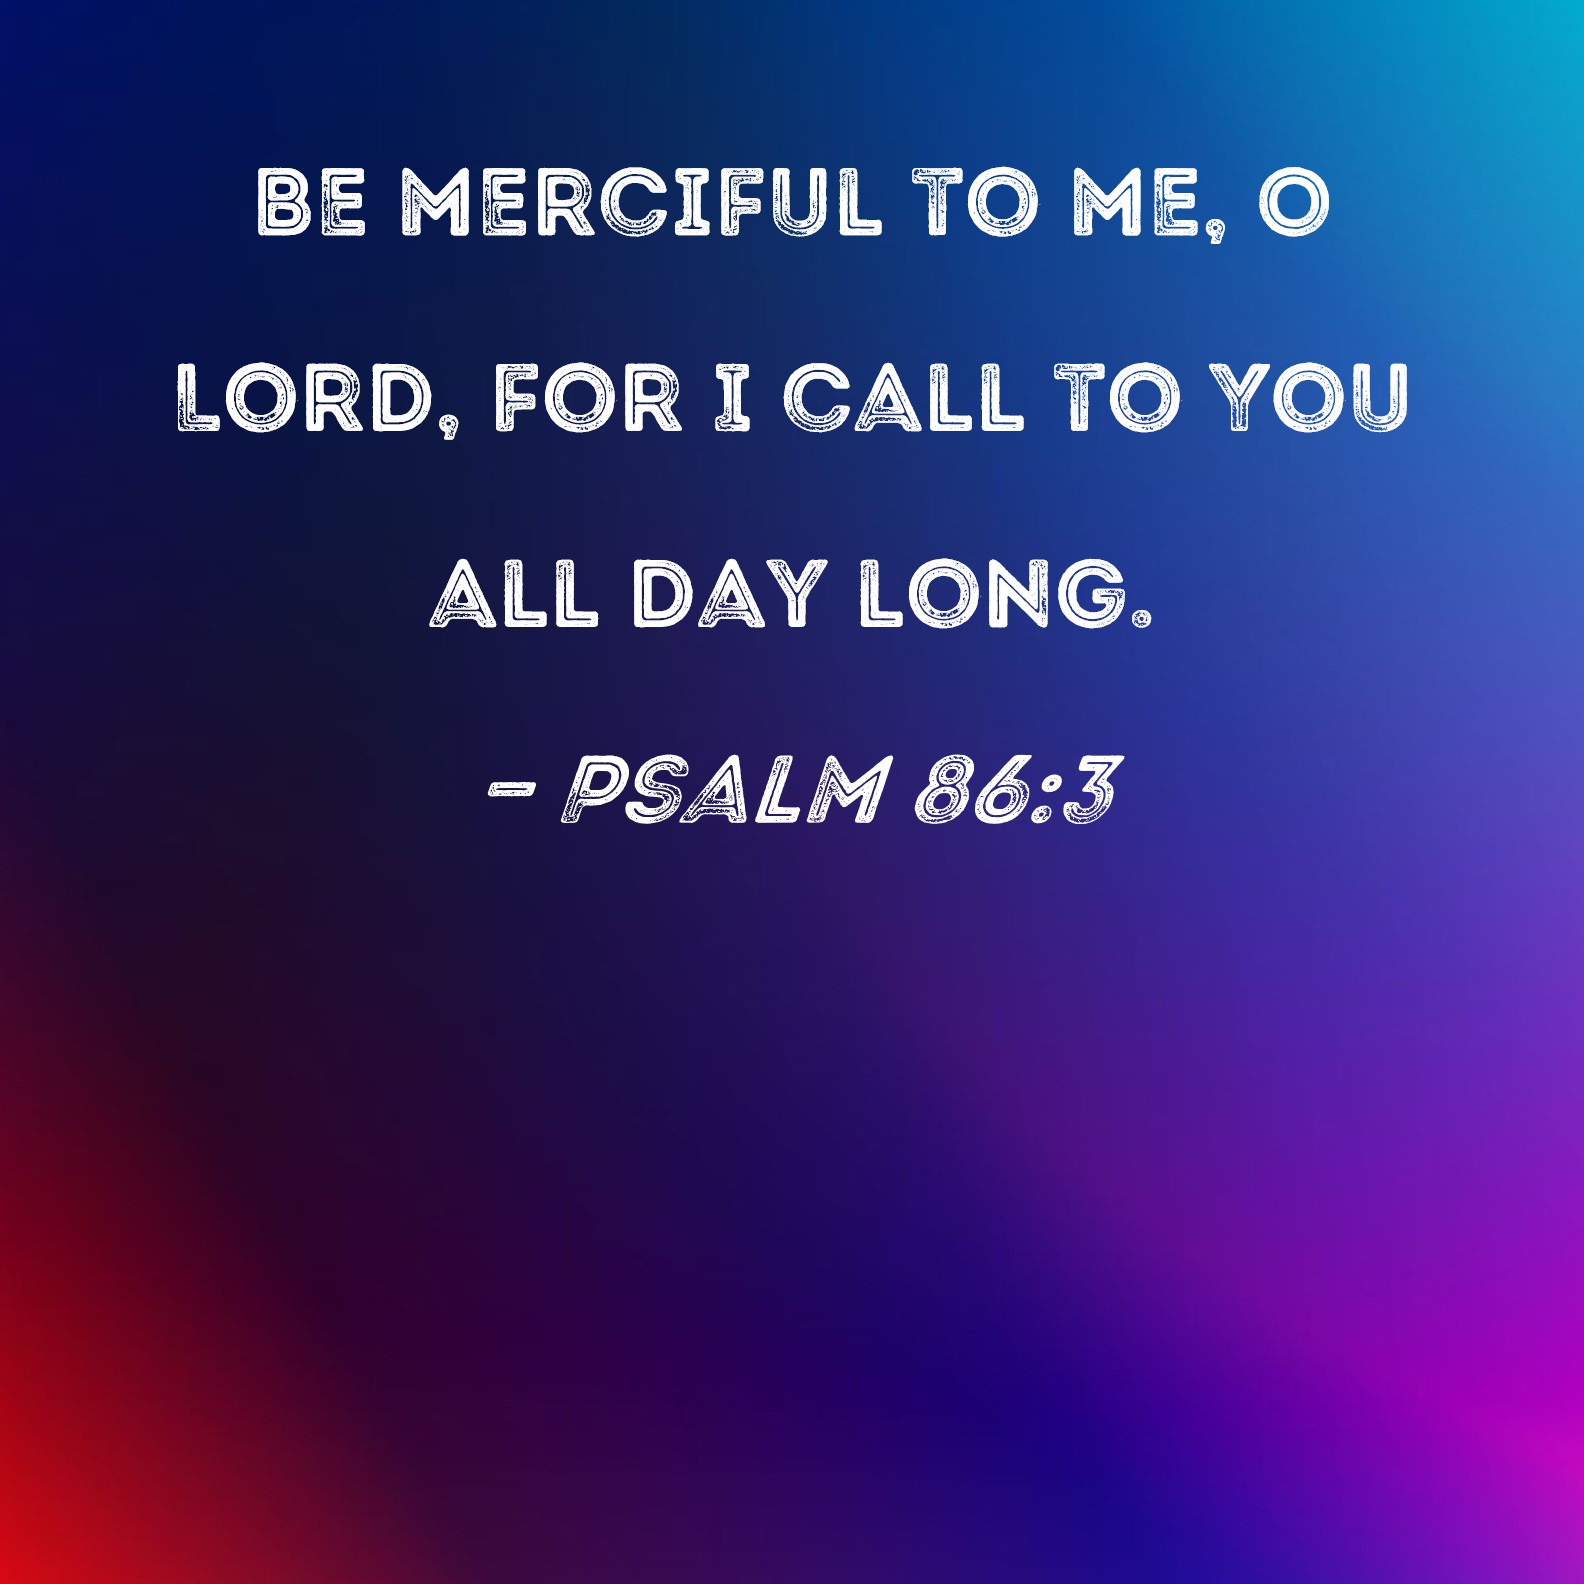 Psalm 86:3 Be merciful to me, O Lord, for I call to You all day long.